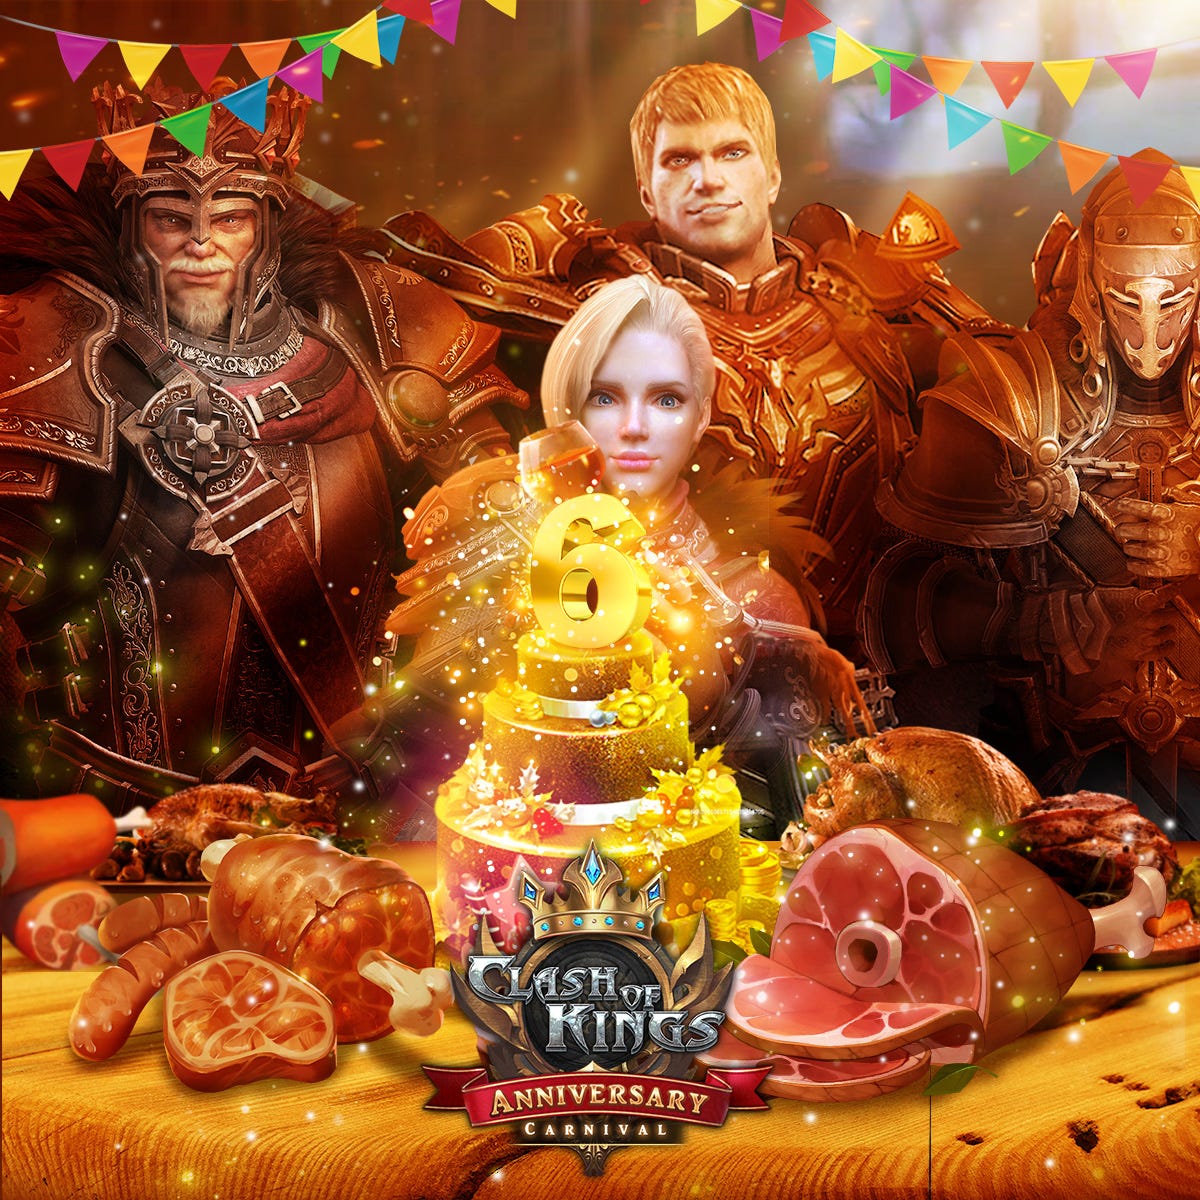 Clash of Kings - #CoK8thAnniversaryCelebration Dear lords, Let's celebrate  the 8th Anniversary of Clash of Kings together!!!🎉 The Throne Rebuild  event event is in full swing, donate items to help the kingdom